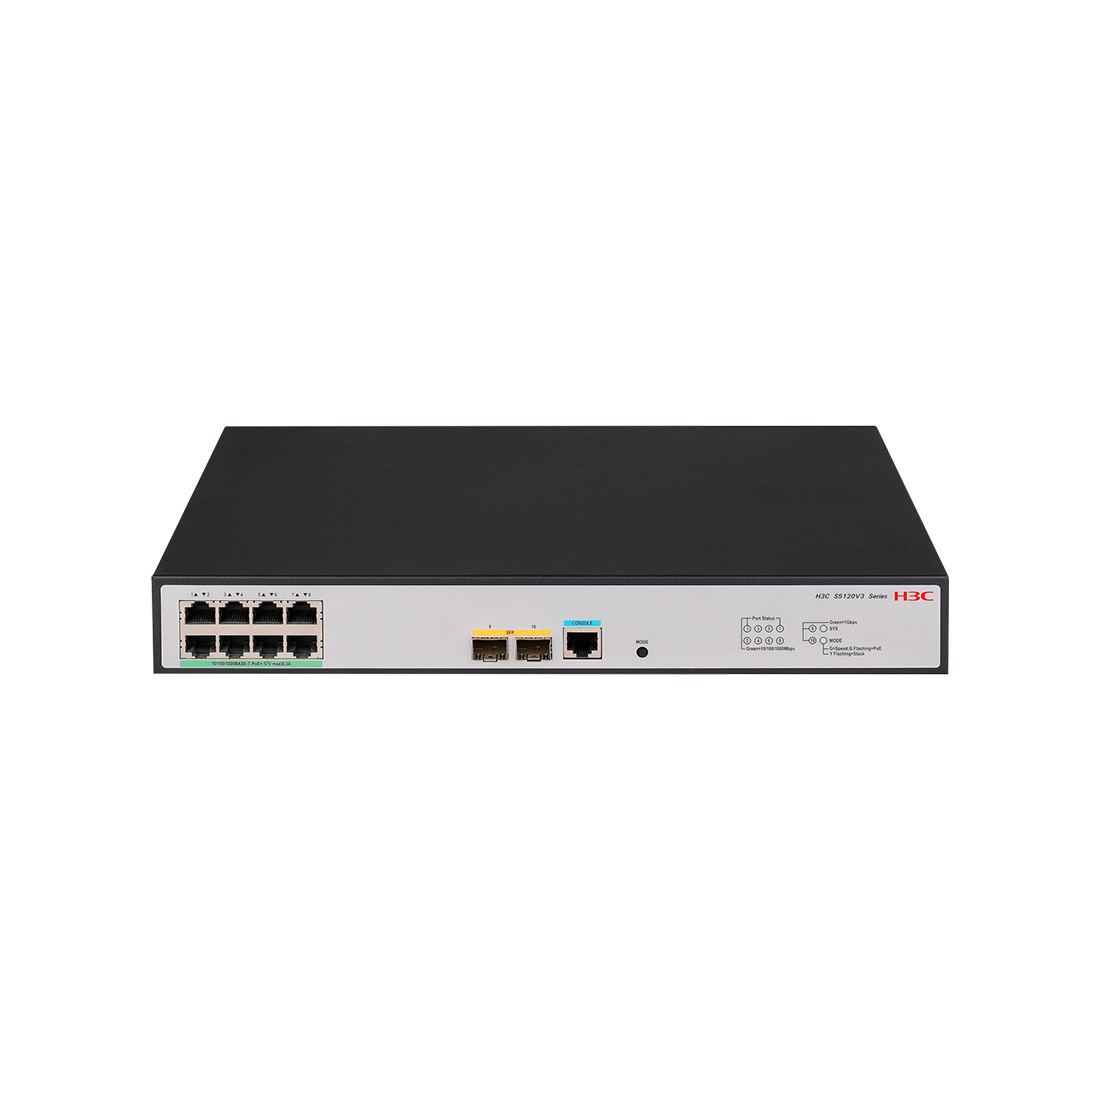 H3C S5120V3-10P-PWR-LI (9801A41P), 8 Port Giga PoE+ 125W with 2 x 1G SFP port Layer 3 Cloud Managed